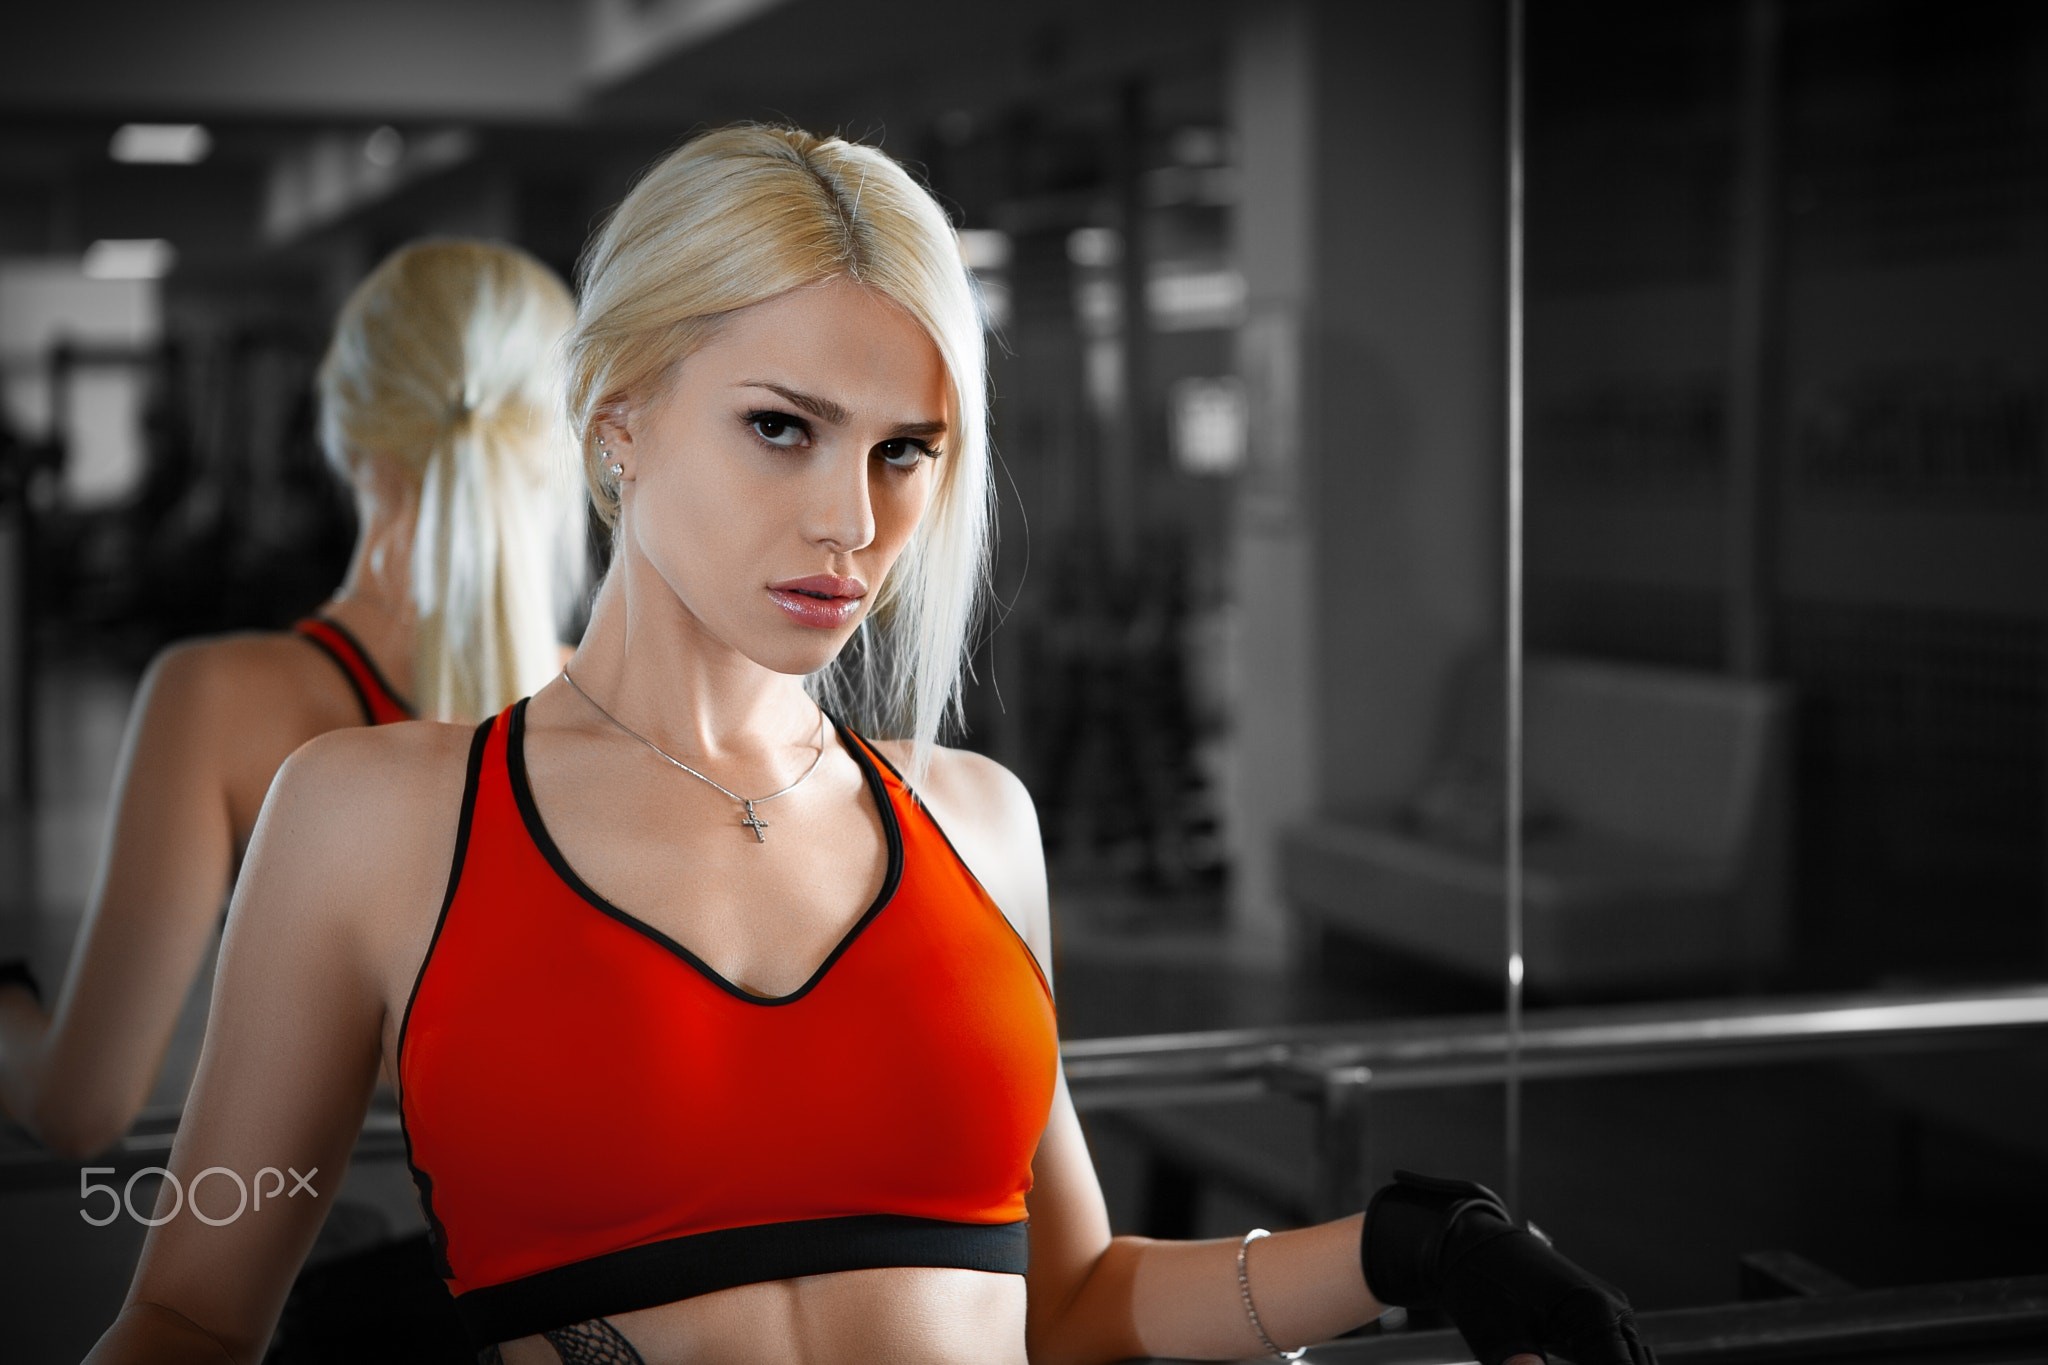 People 2048x1365 women blonde mirror reflection gloves portrait tattoo necklace sportswear sports bra gyms gym clothes fitness model 500px watermarked